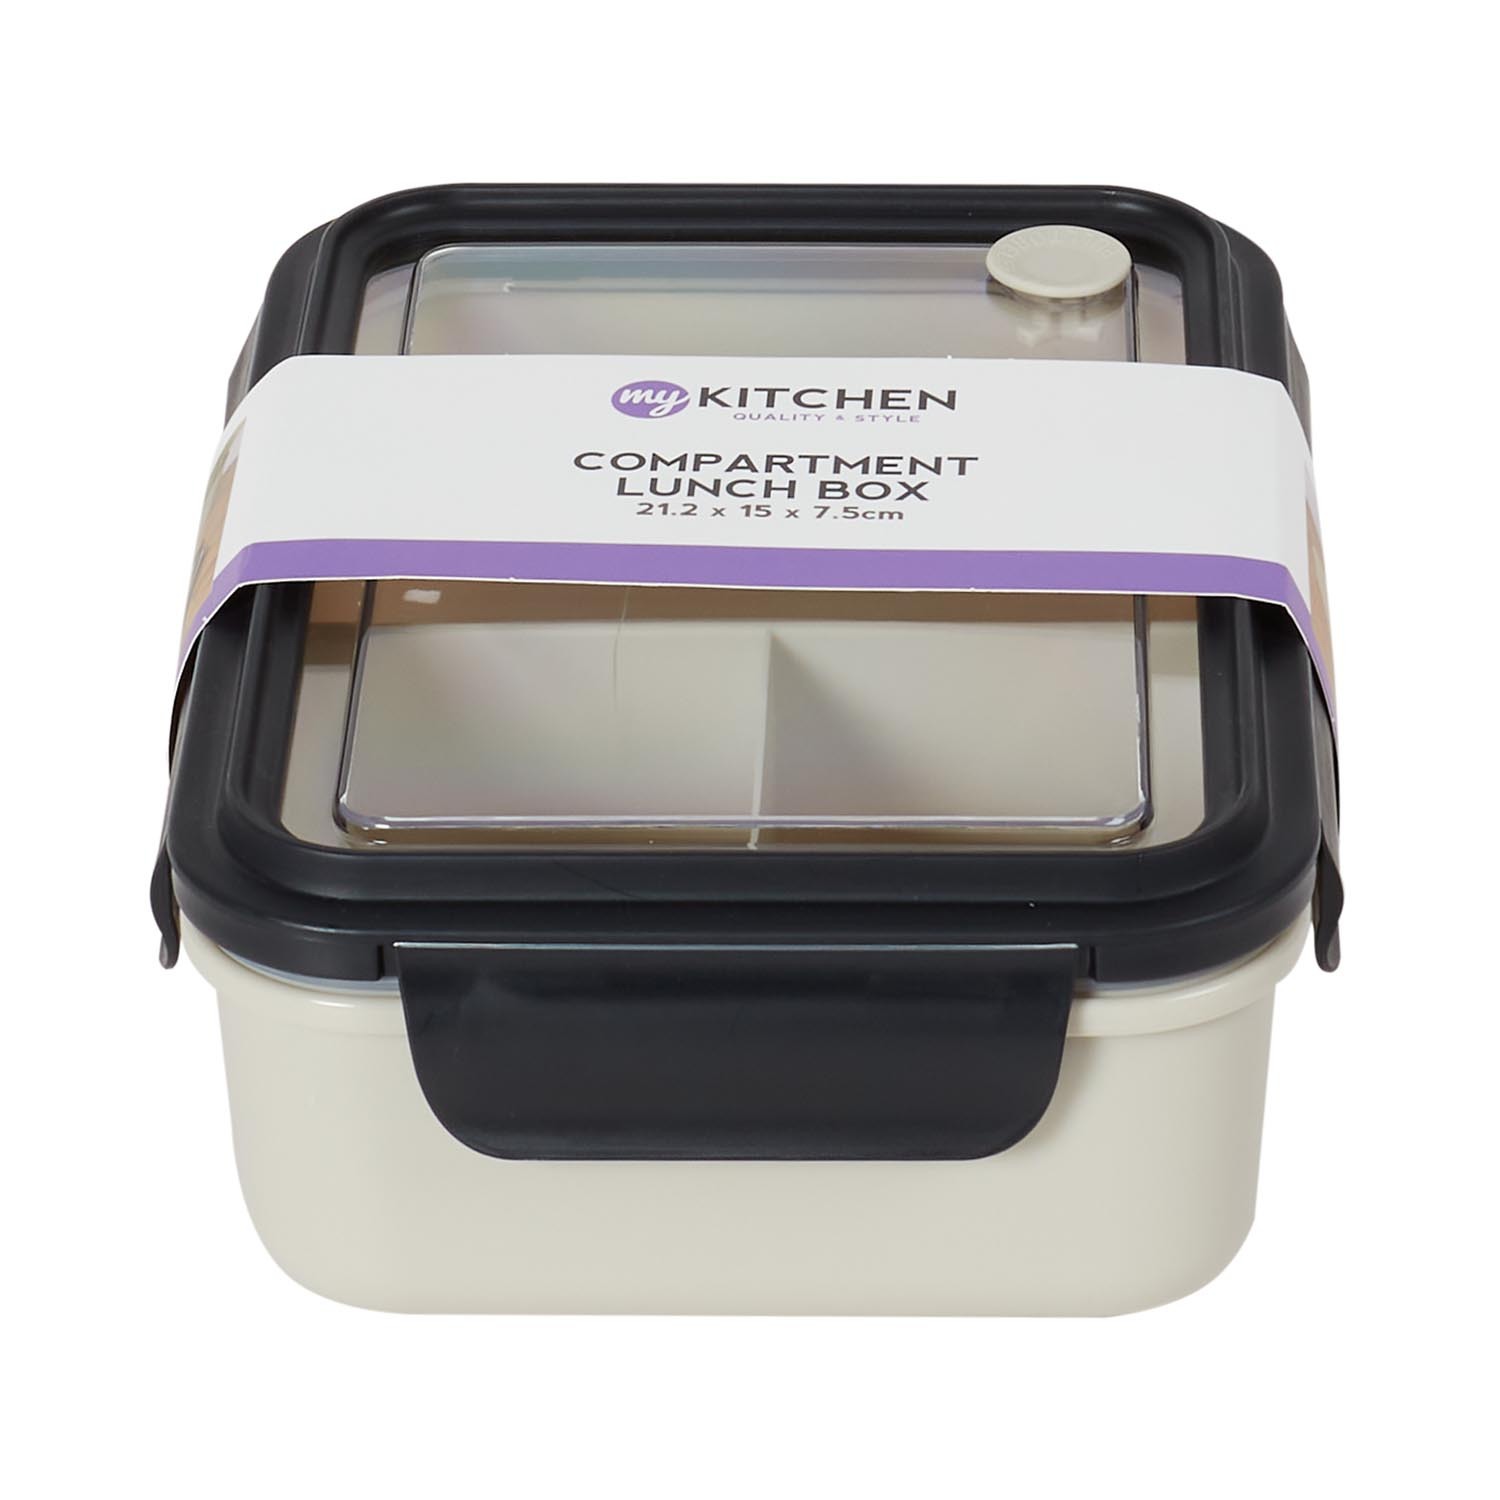 Compartment Lunch Box - White Image 1